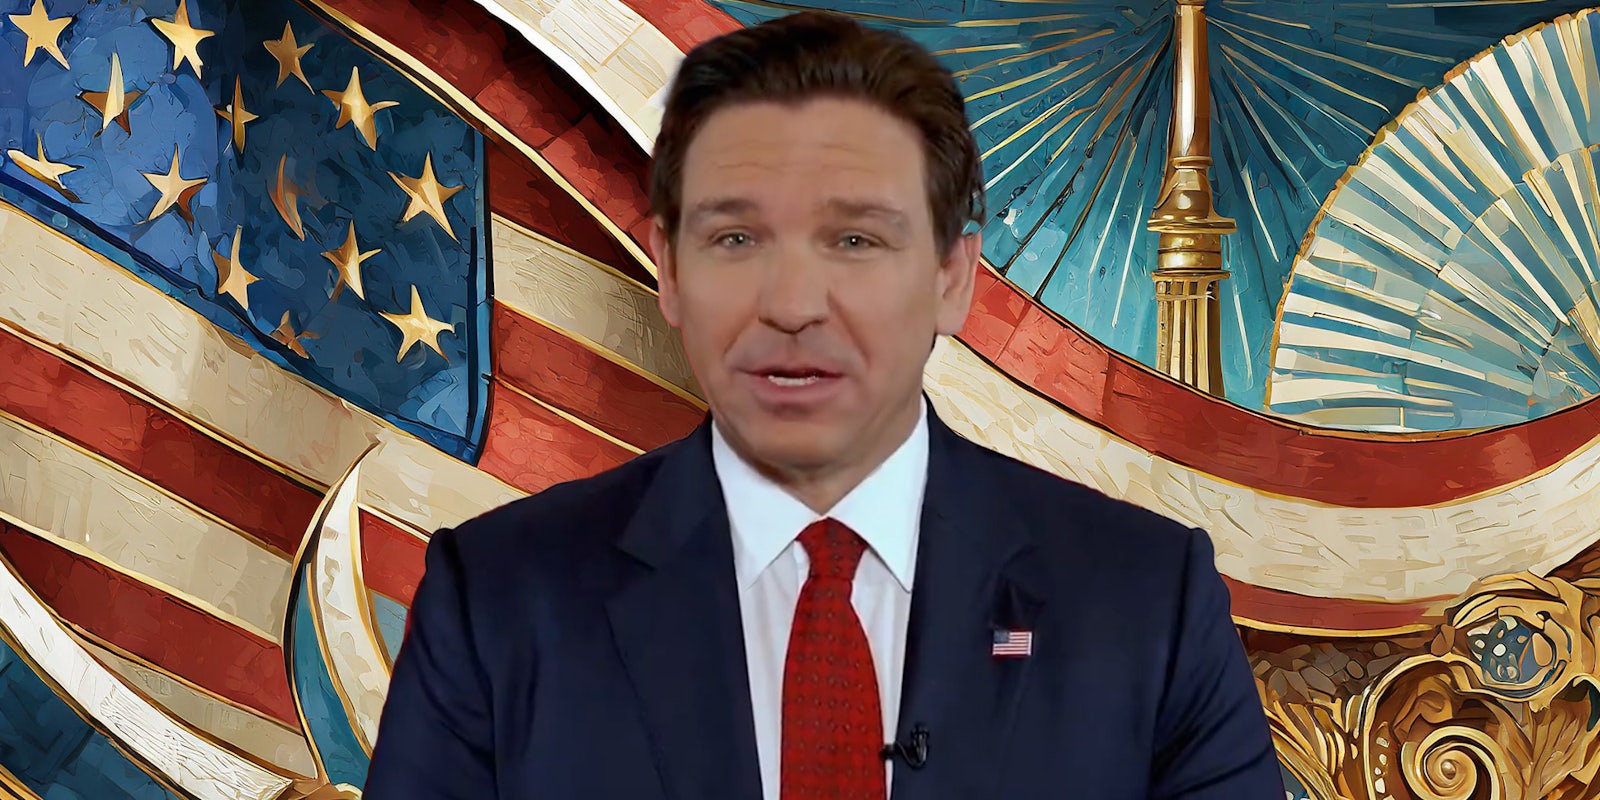 Ron DeSantis mocked after attributing Budweiser quote to Winston Churchill